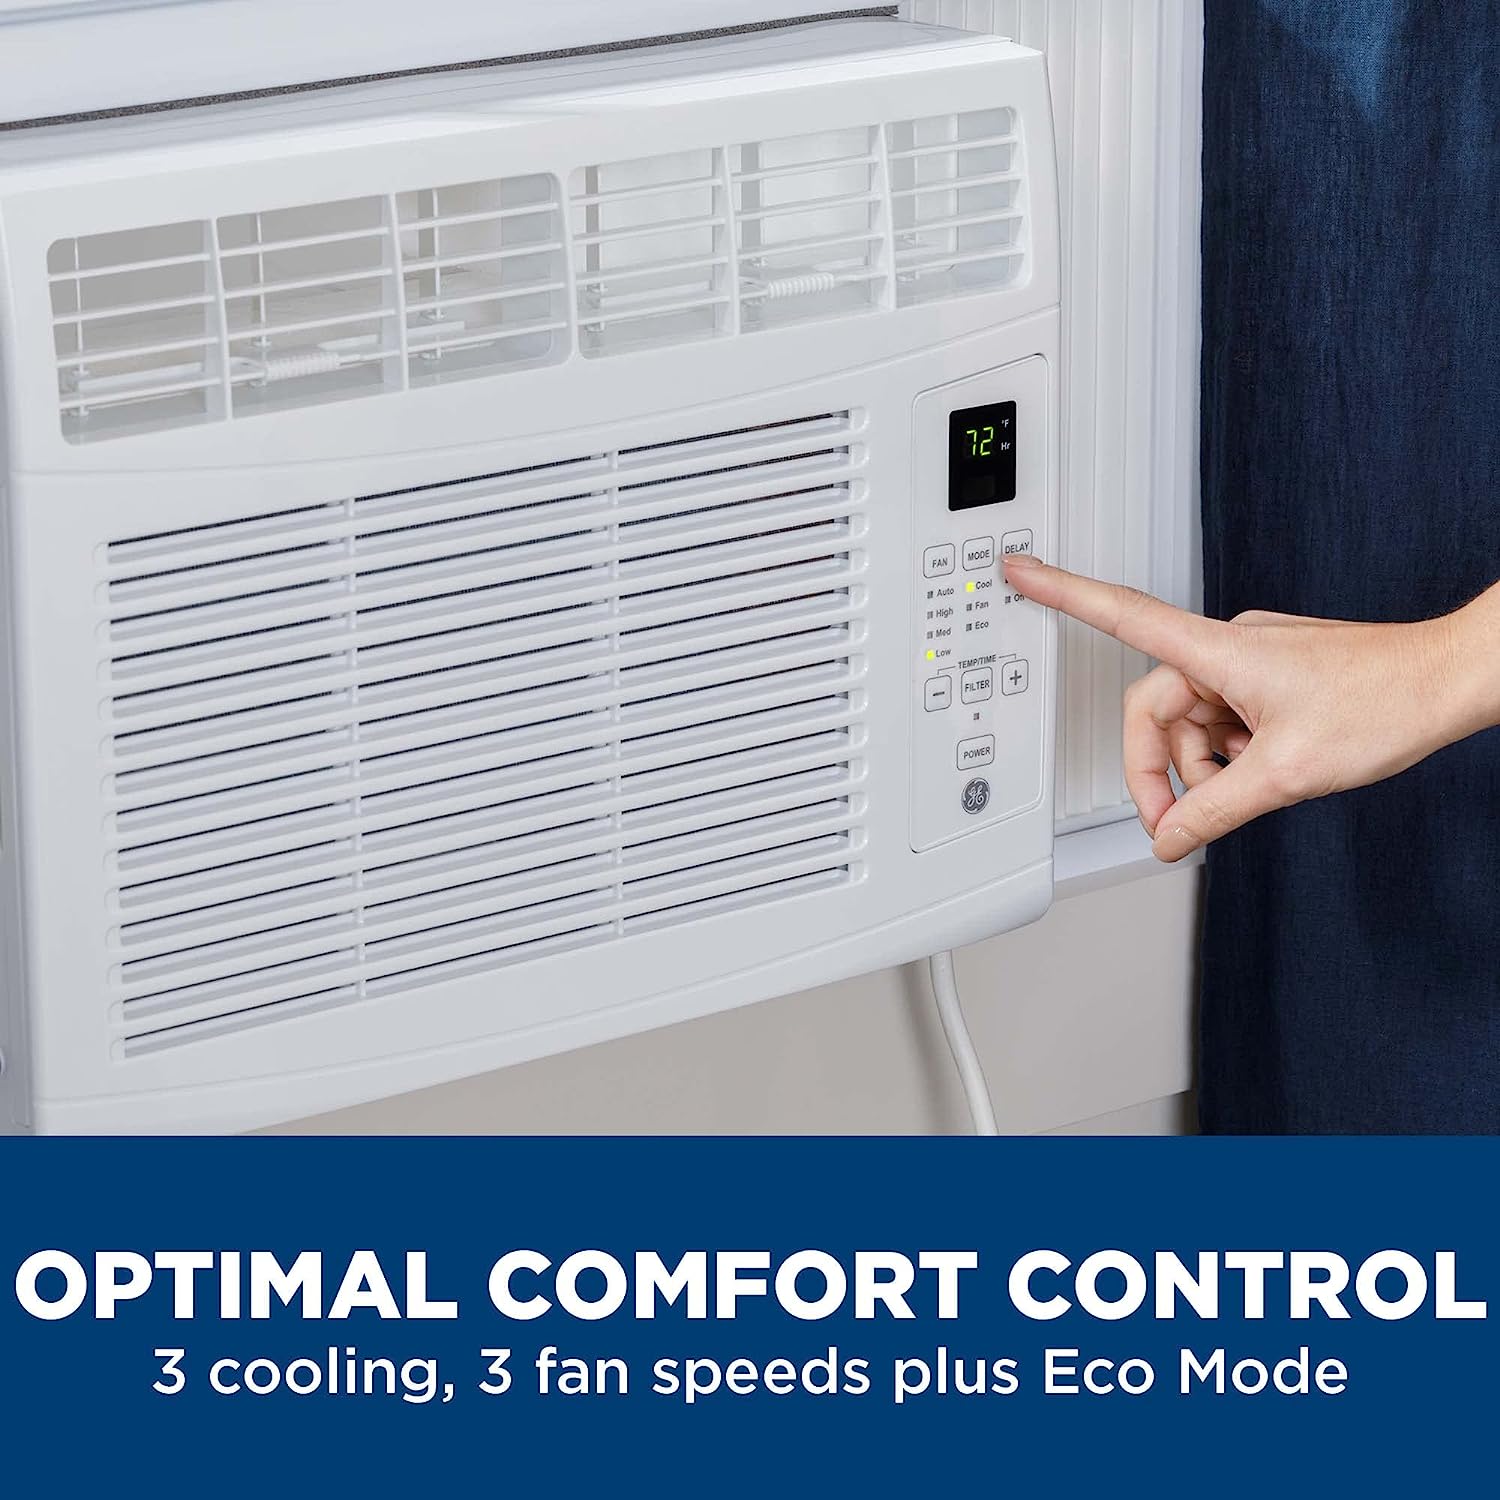 https://bigbigmart.com/wp-content/uploads/2023/06/GE-Electronic-Window-Air-Conditioner-6000-BTU-Efficient-Cooling-for-Smaller-Areas-Like-Bedrooms-and-Guest-Rooms-6K-BTU-Window-AC-Unit-with-Easy-Install-Kit-White5.jpg